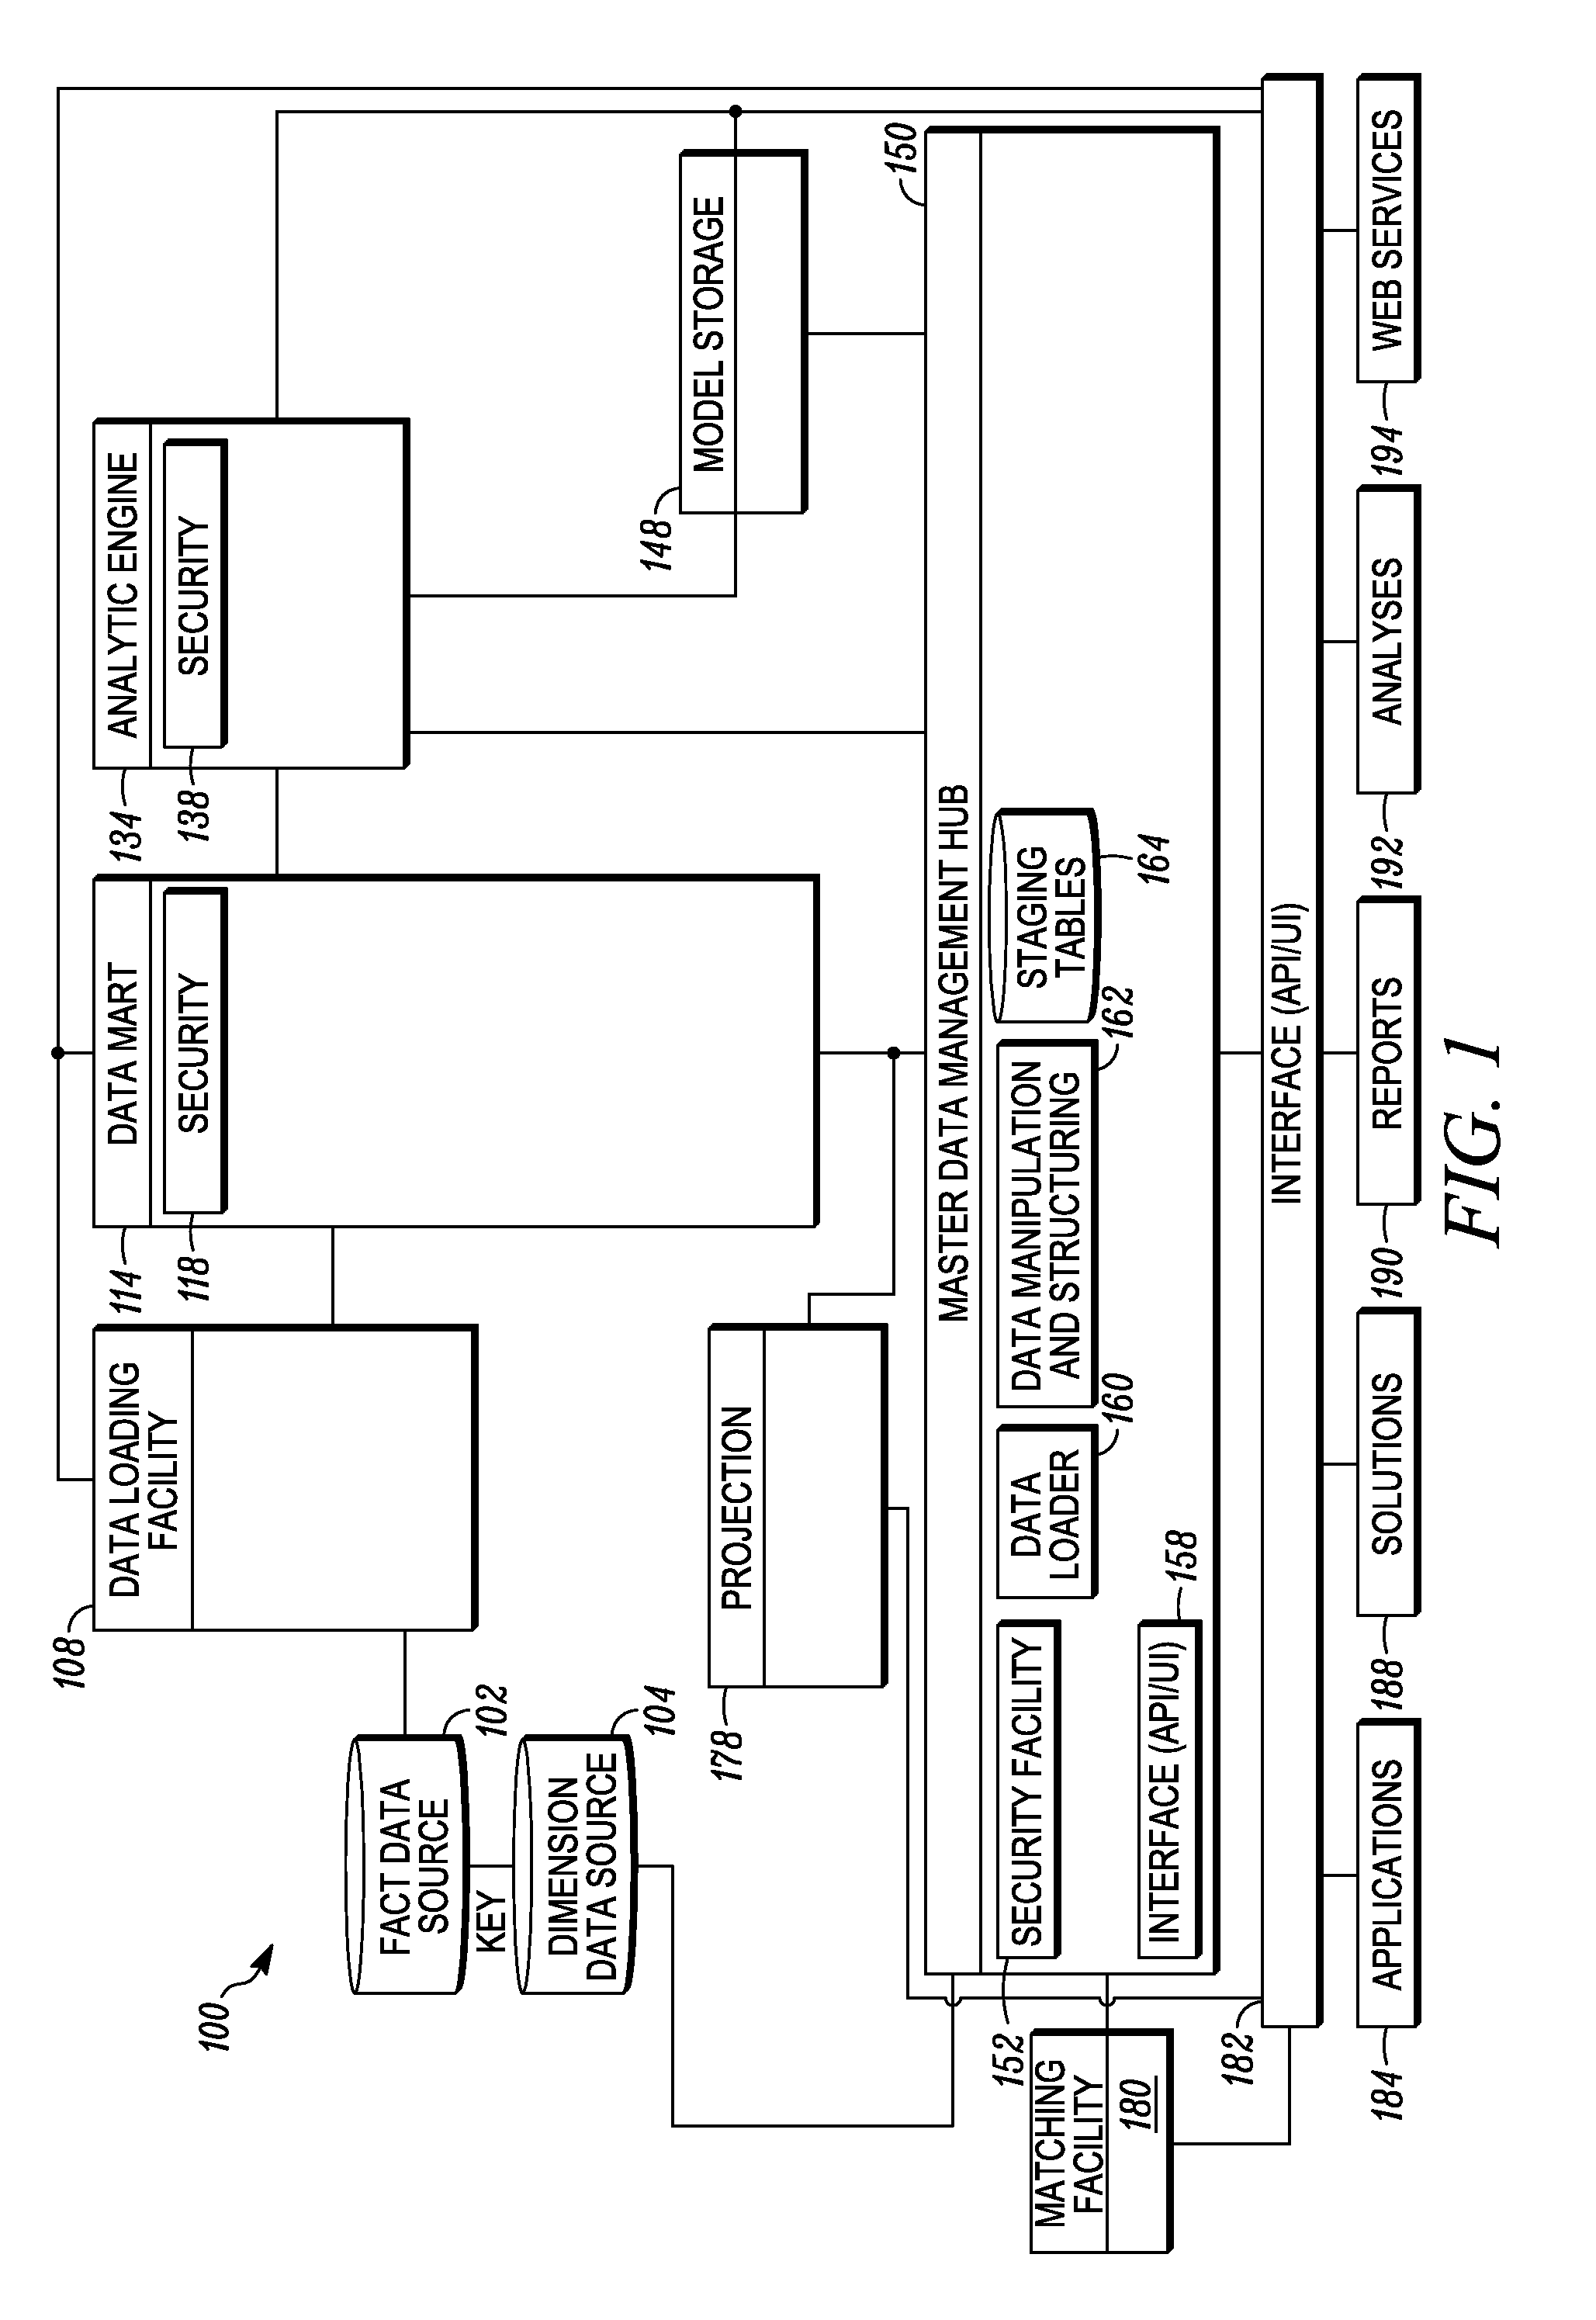 Similarity matching of products based on multiple classification schemes